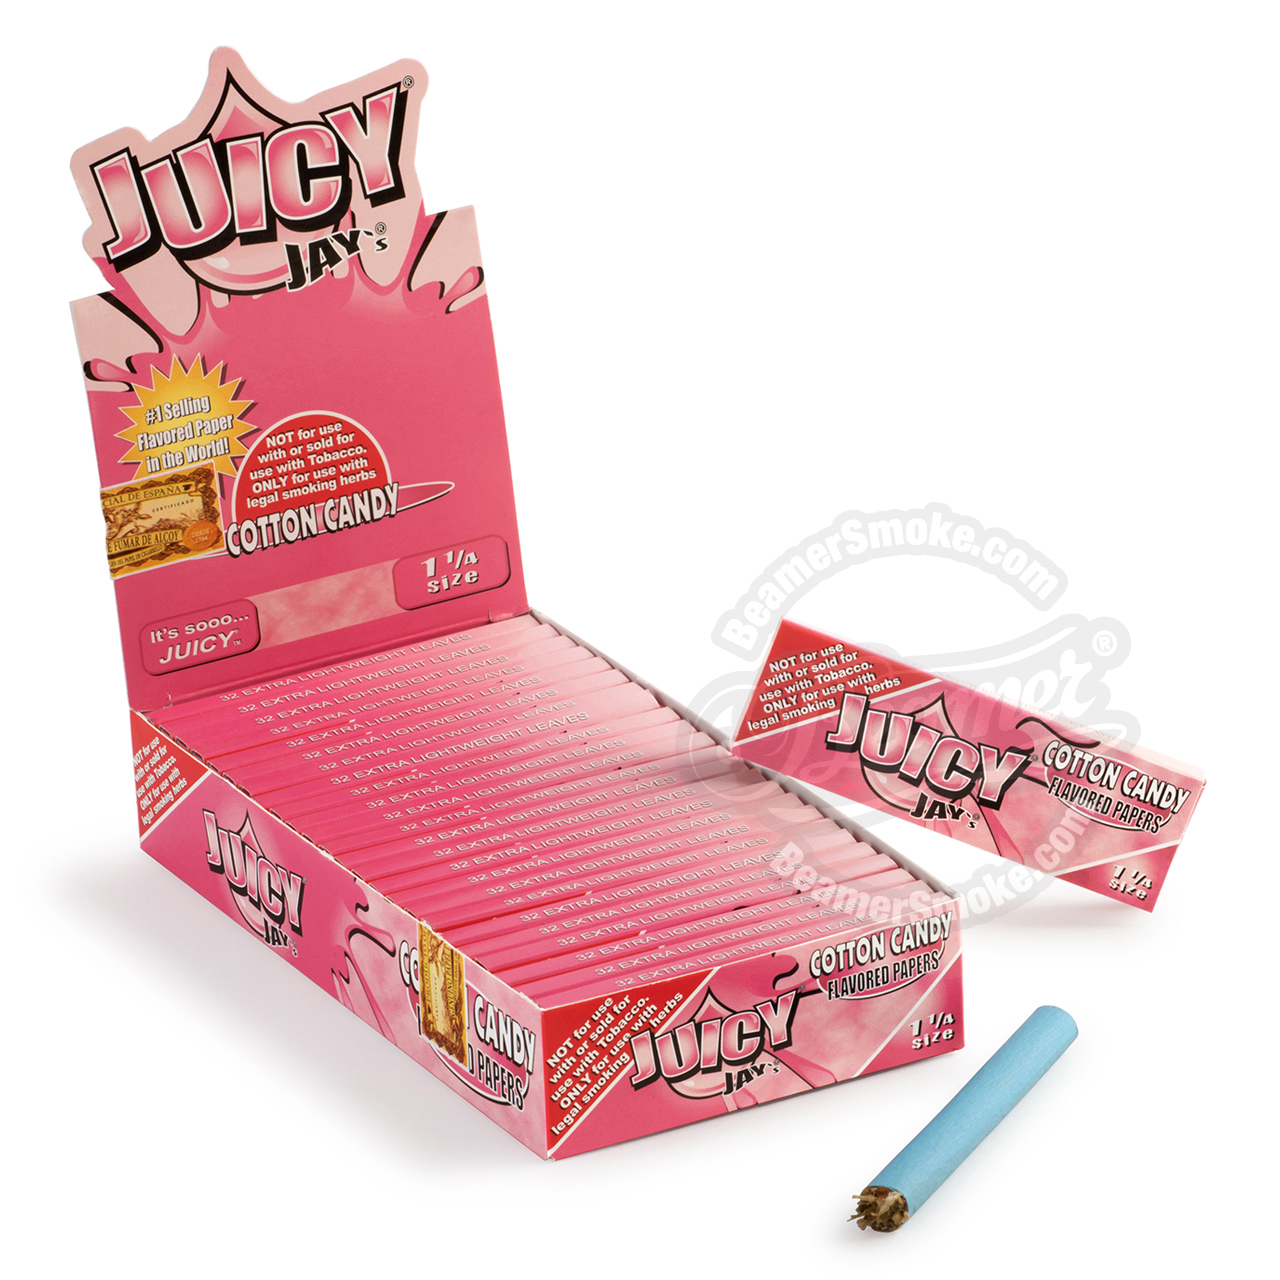 Juicy Jay’s Cotton Candy Flavor 1 1/4 Size Rolling Papers